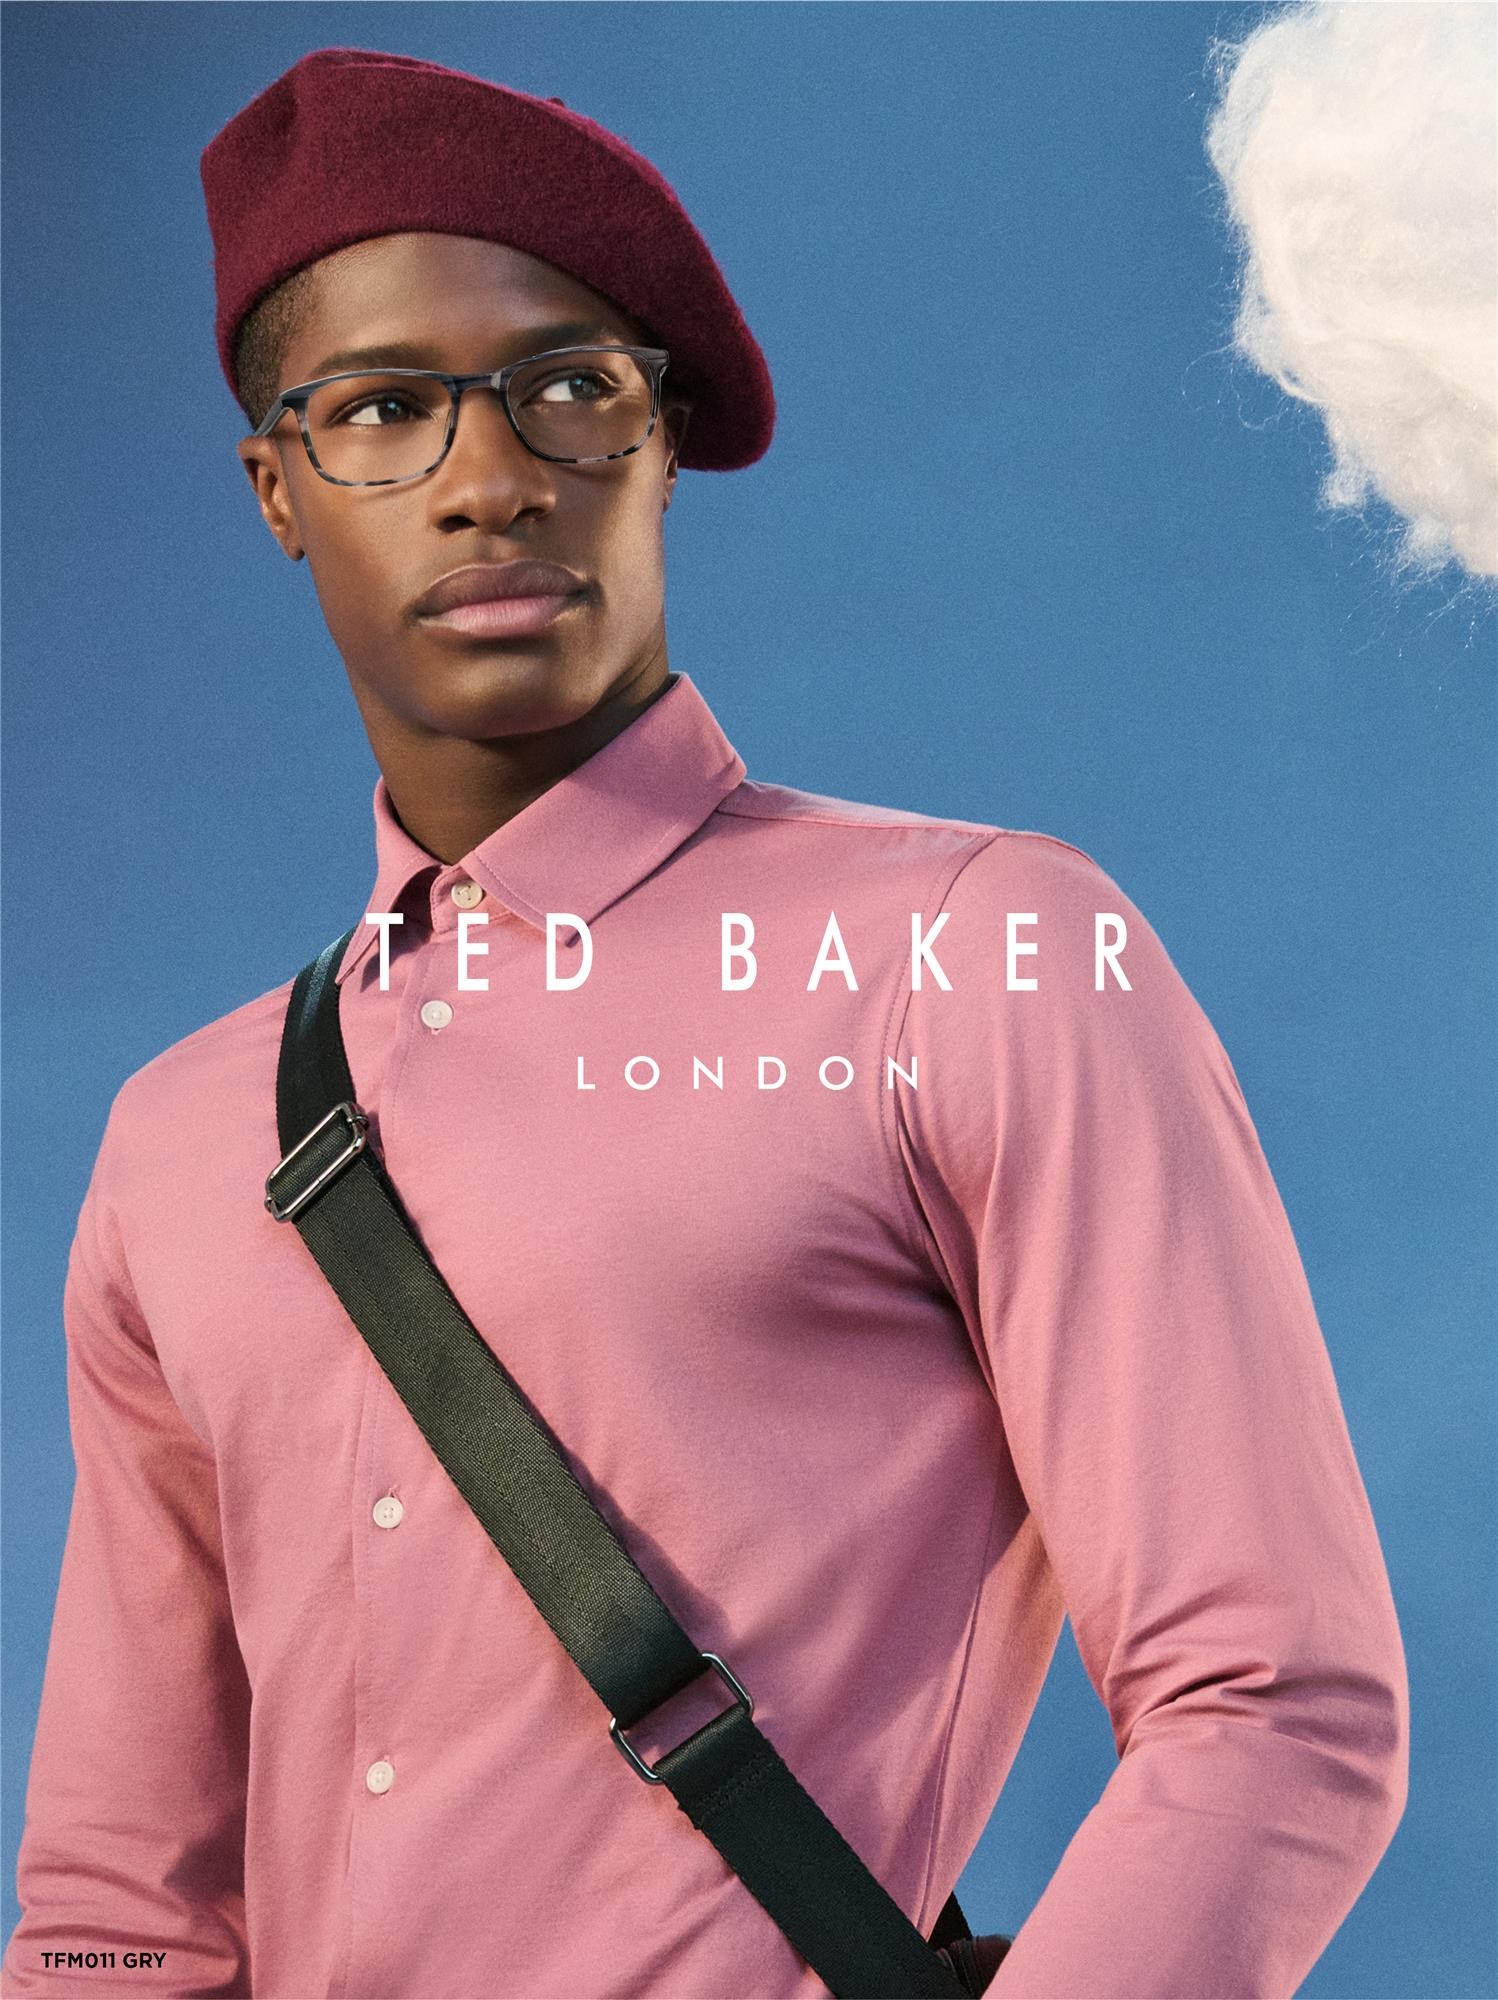 Fashion Look Featuring Ted Baker Dresses and Ted Baker Dresses by